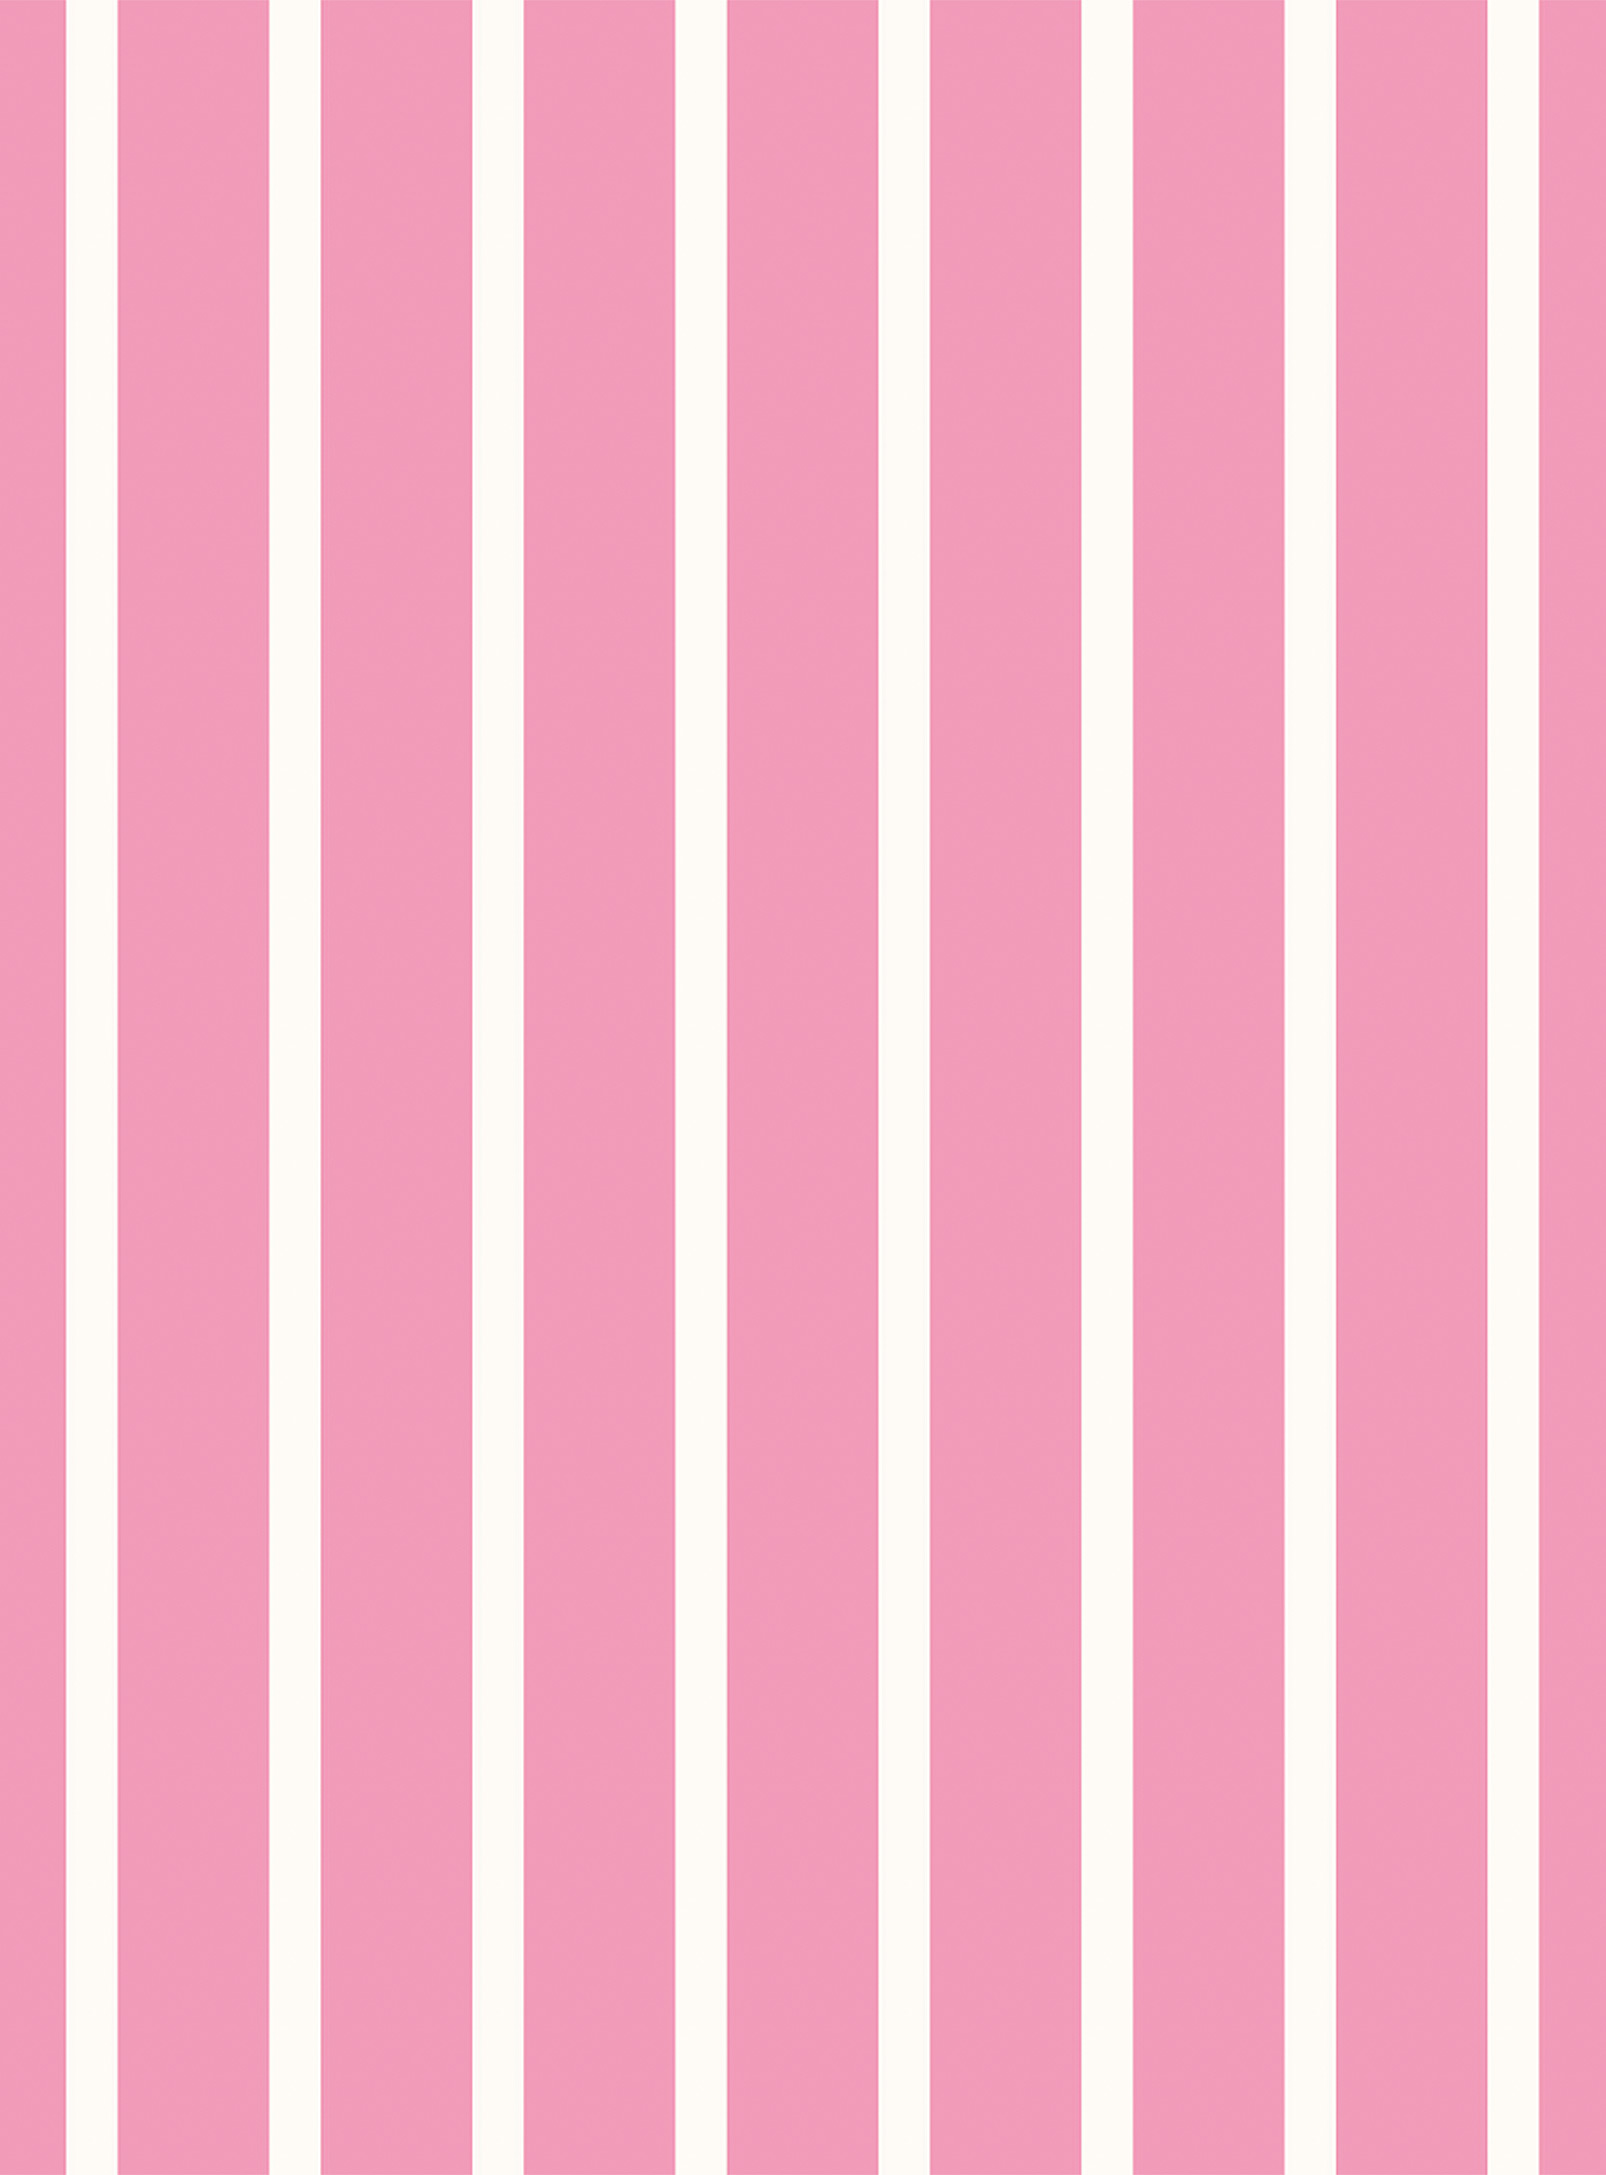 Station D Gelato Striped Wallpaper Strip See Available Sizes In Pink